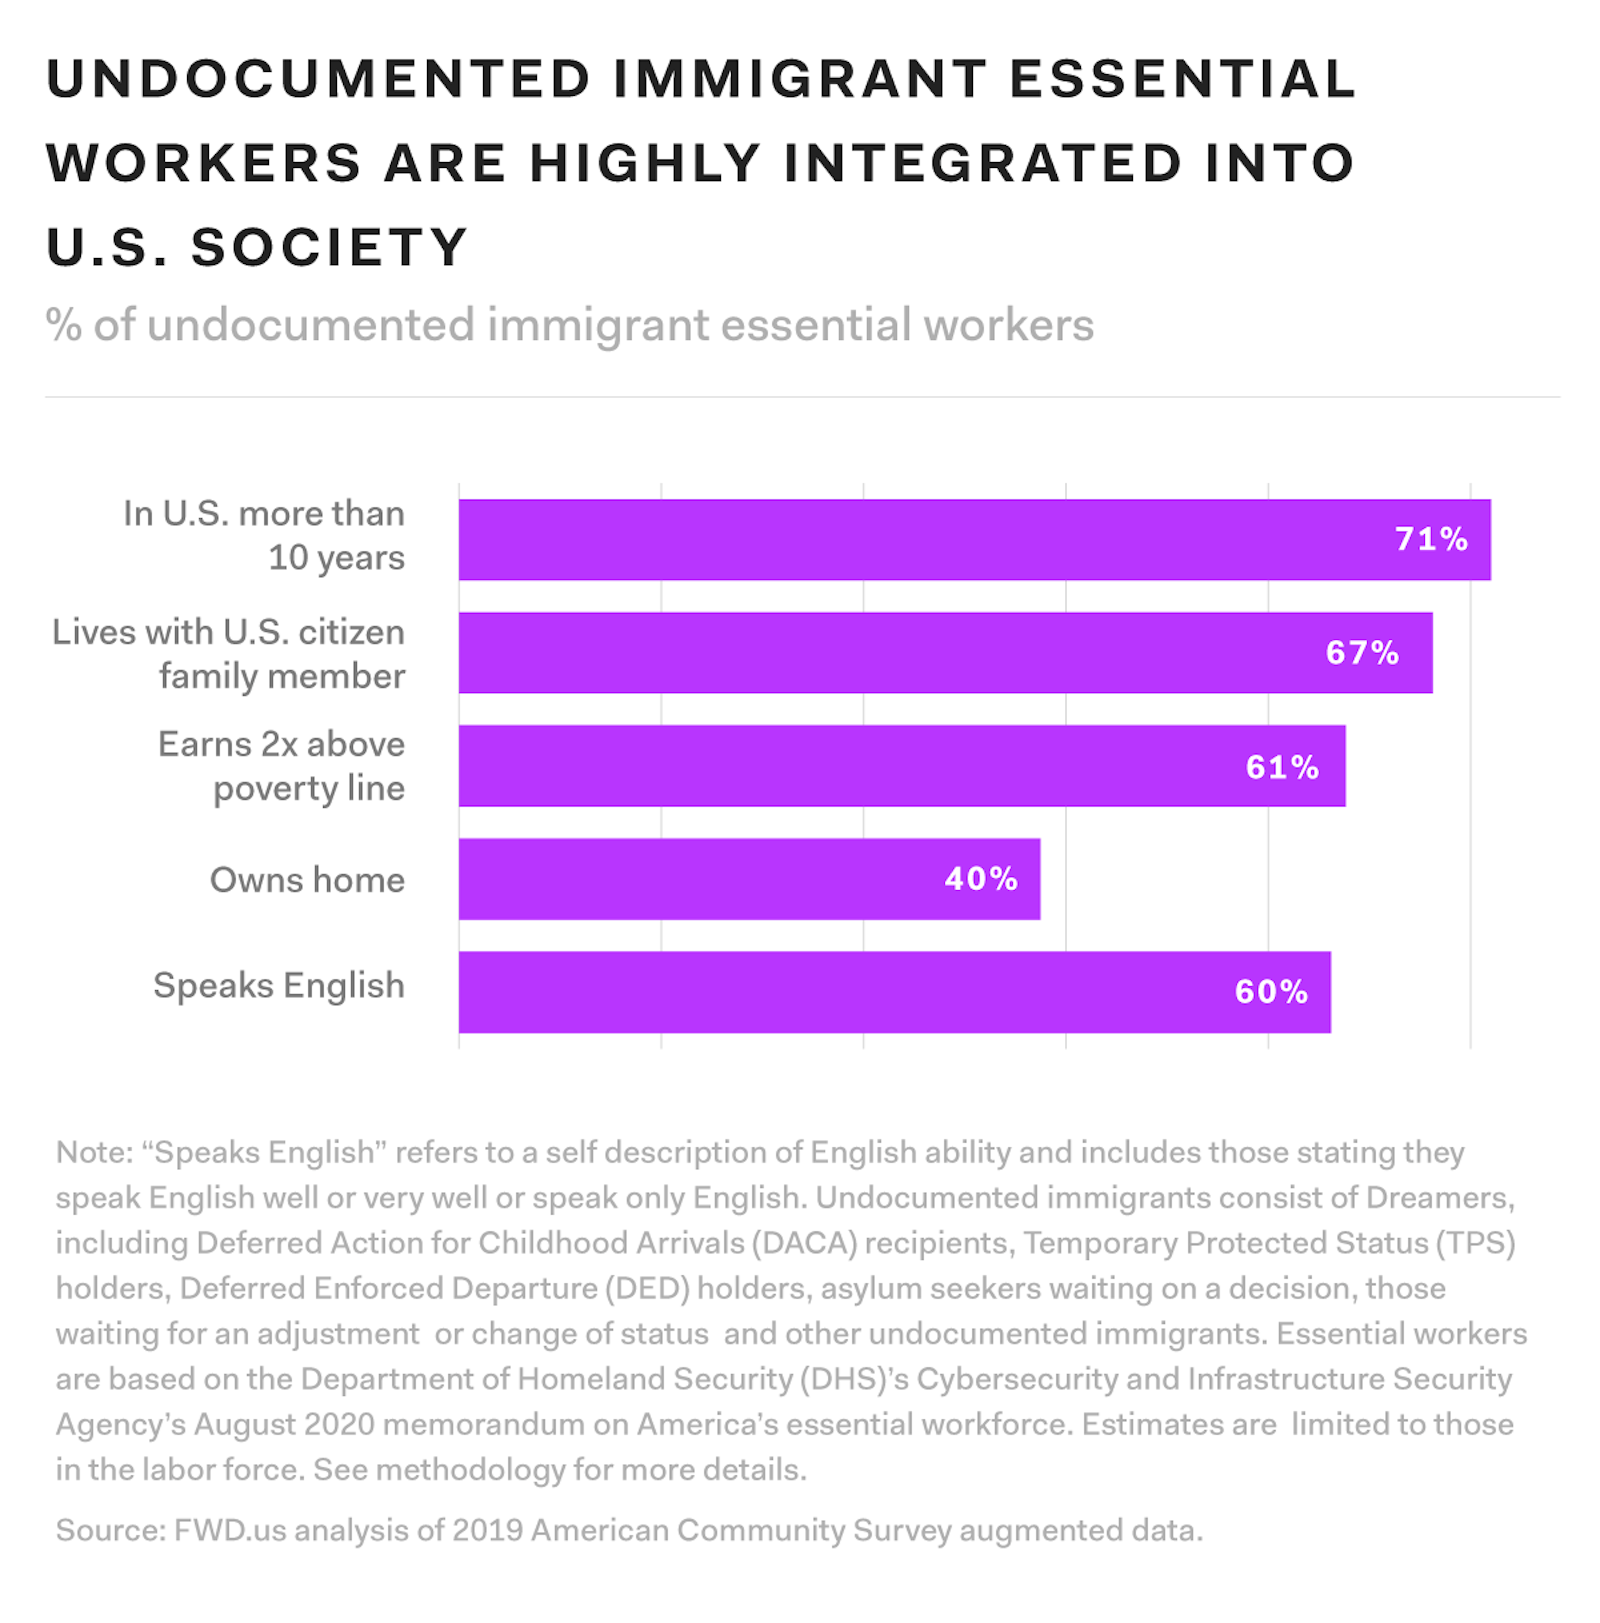 essays on undocumented workers